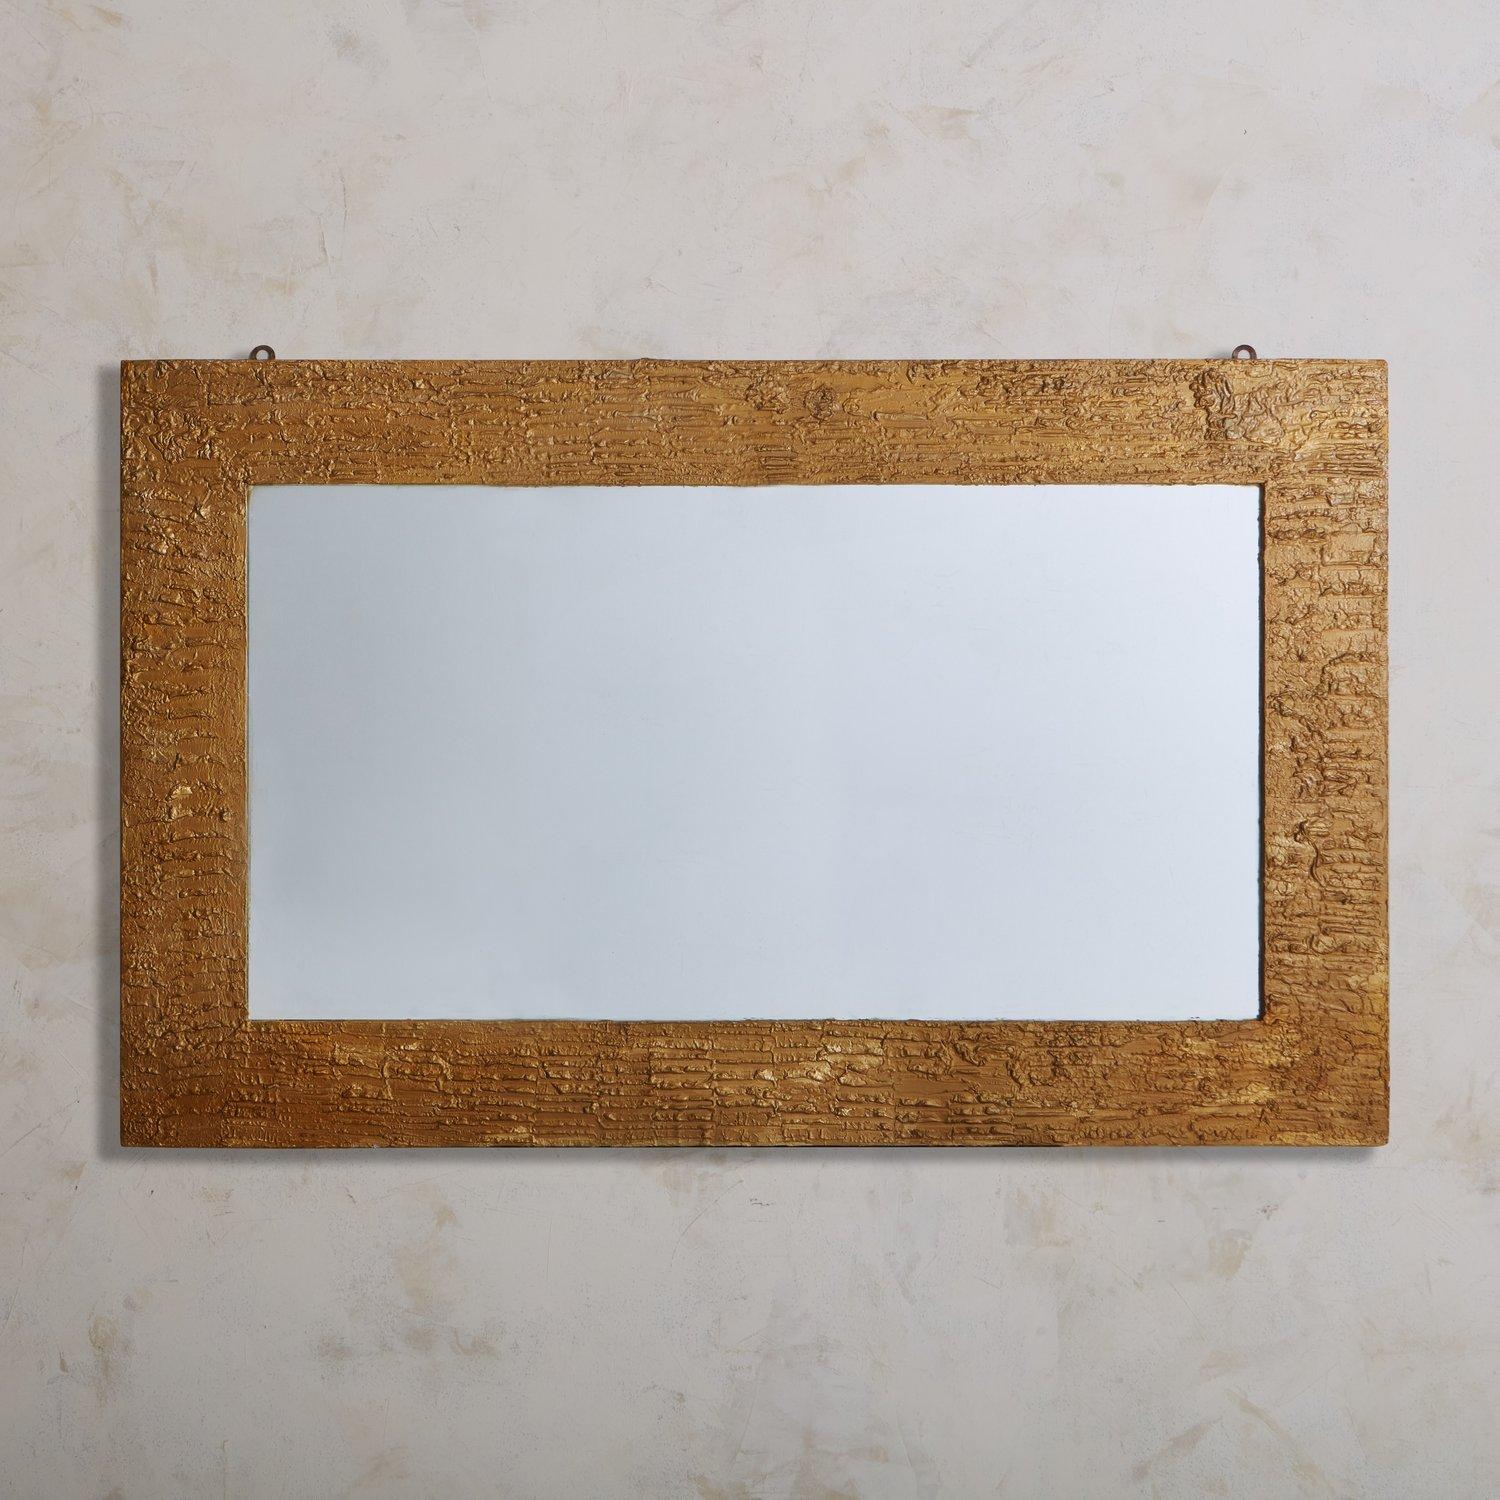 A Mid-Century Italian wall mirror featuring a rectangular textured plaster frame with a gold finish. This mirror has a wooden backing and hardware for hanging. Sourced in Italy, 1970s.

